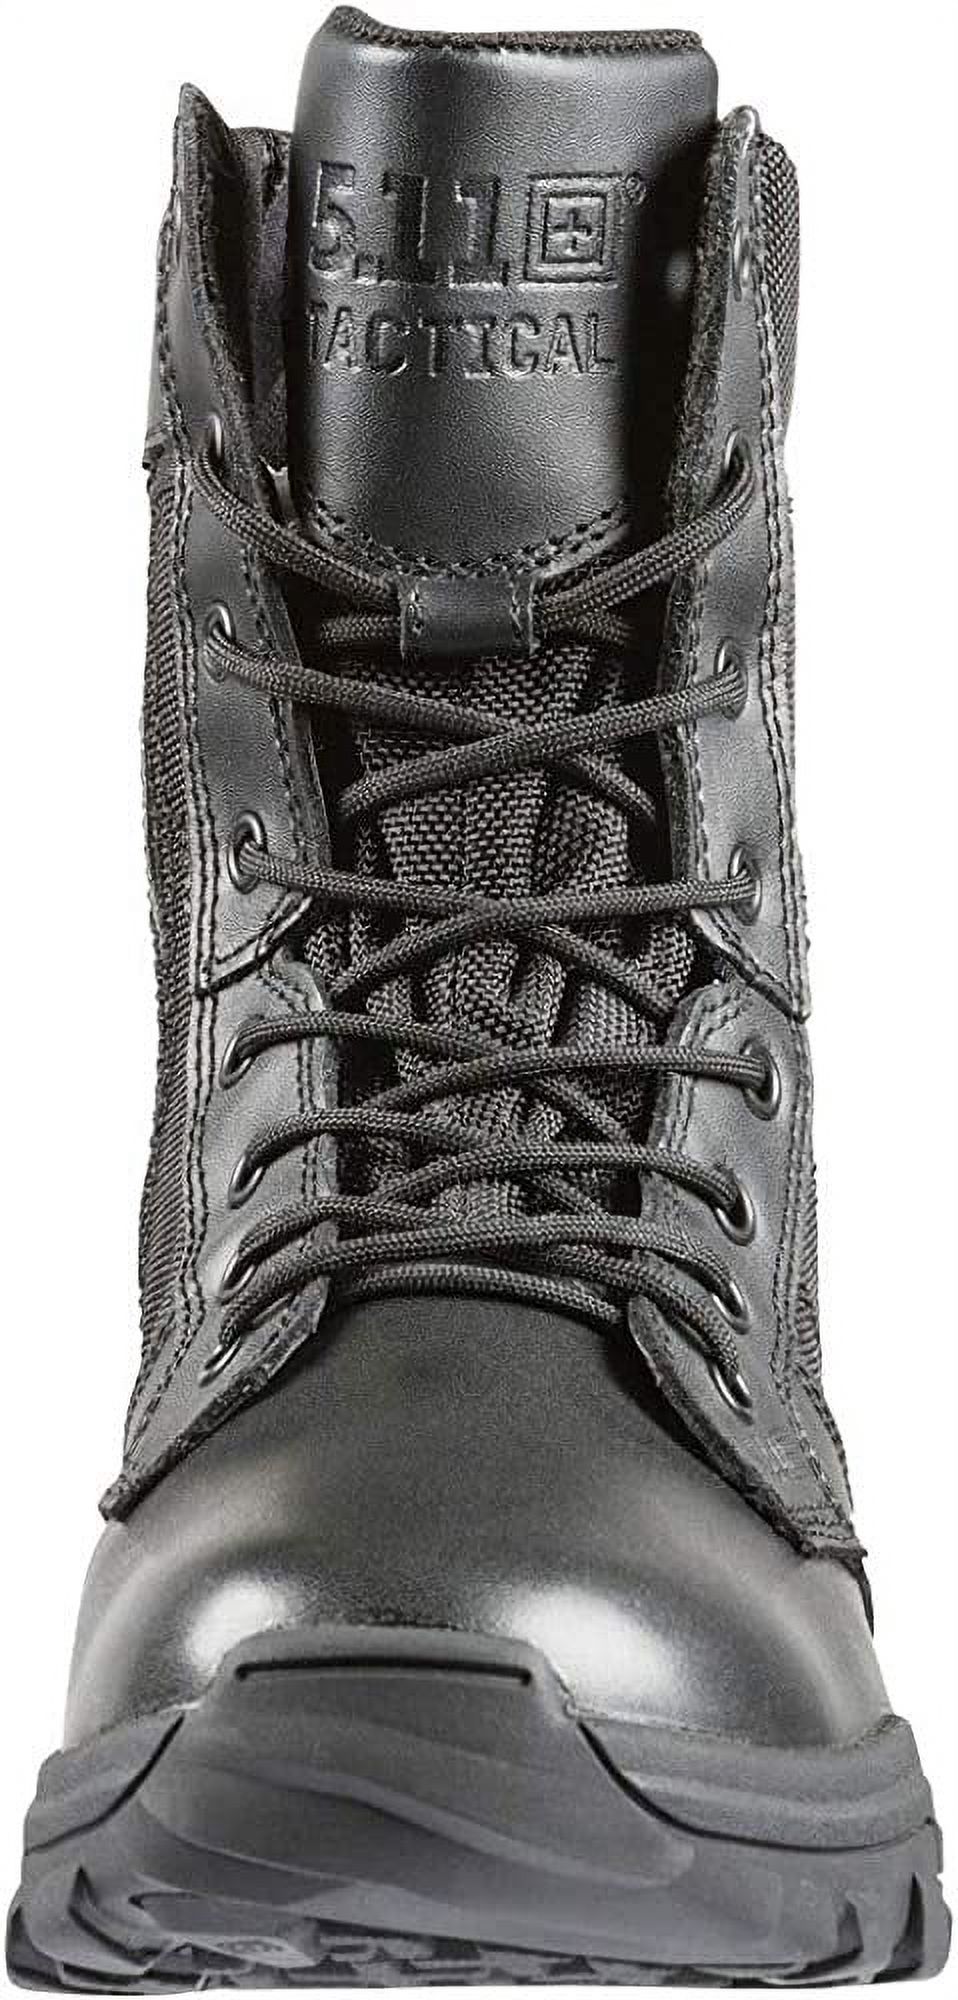 5.11 Work Gear Men's Speed 3.0 Urban Sidezip Boot, Ortholite Insole, Moisture Wicking, Black, 12 Wide, Style 12336 - image 2 of 6